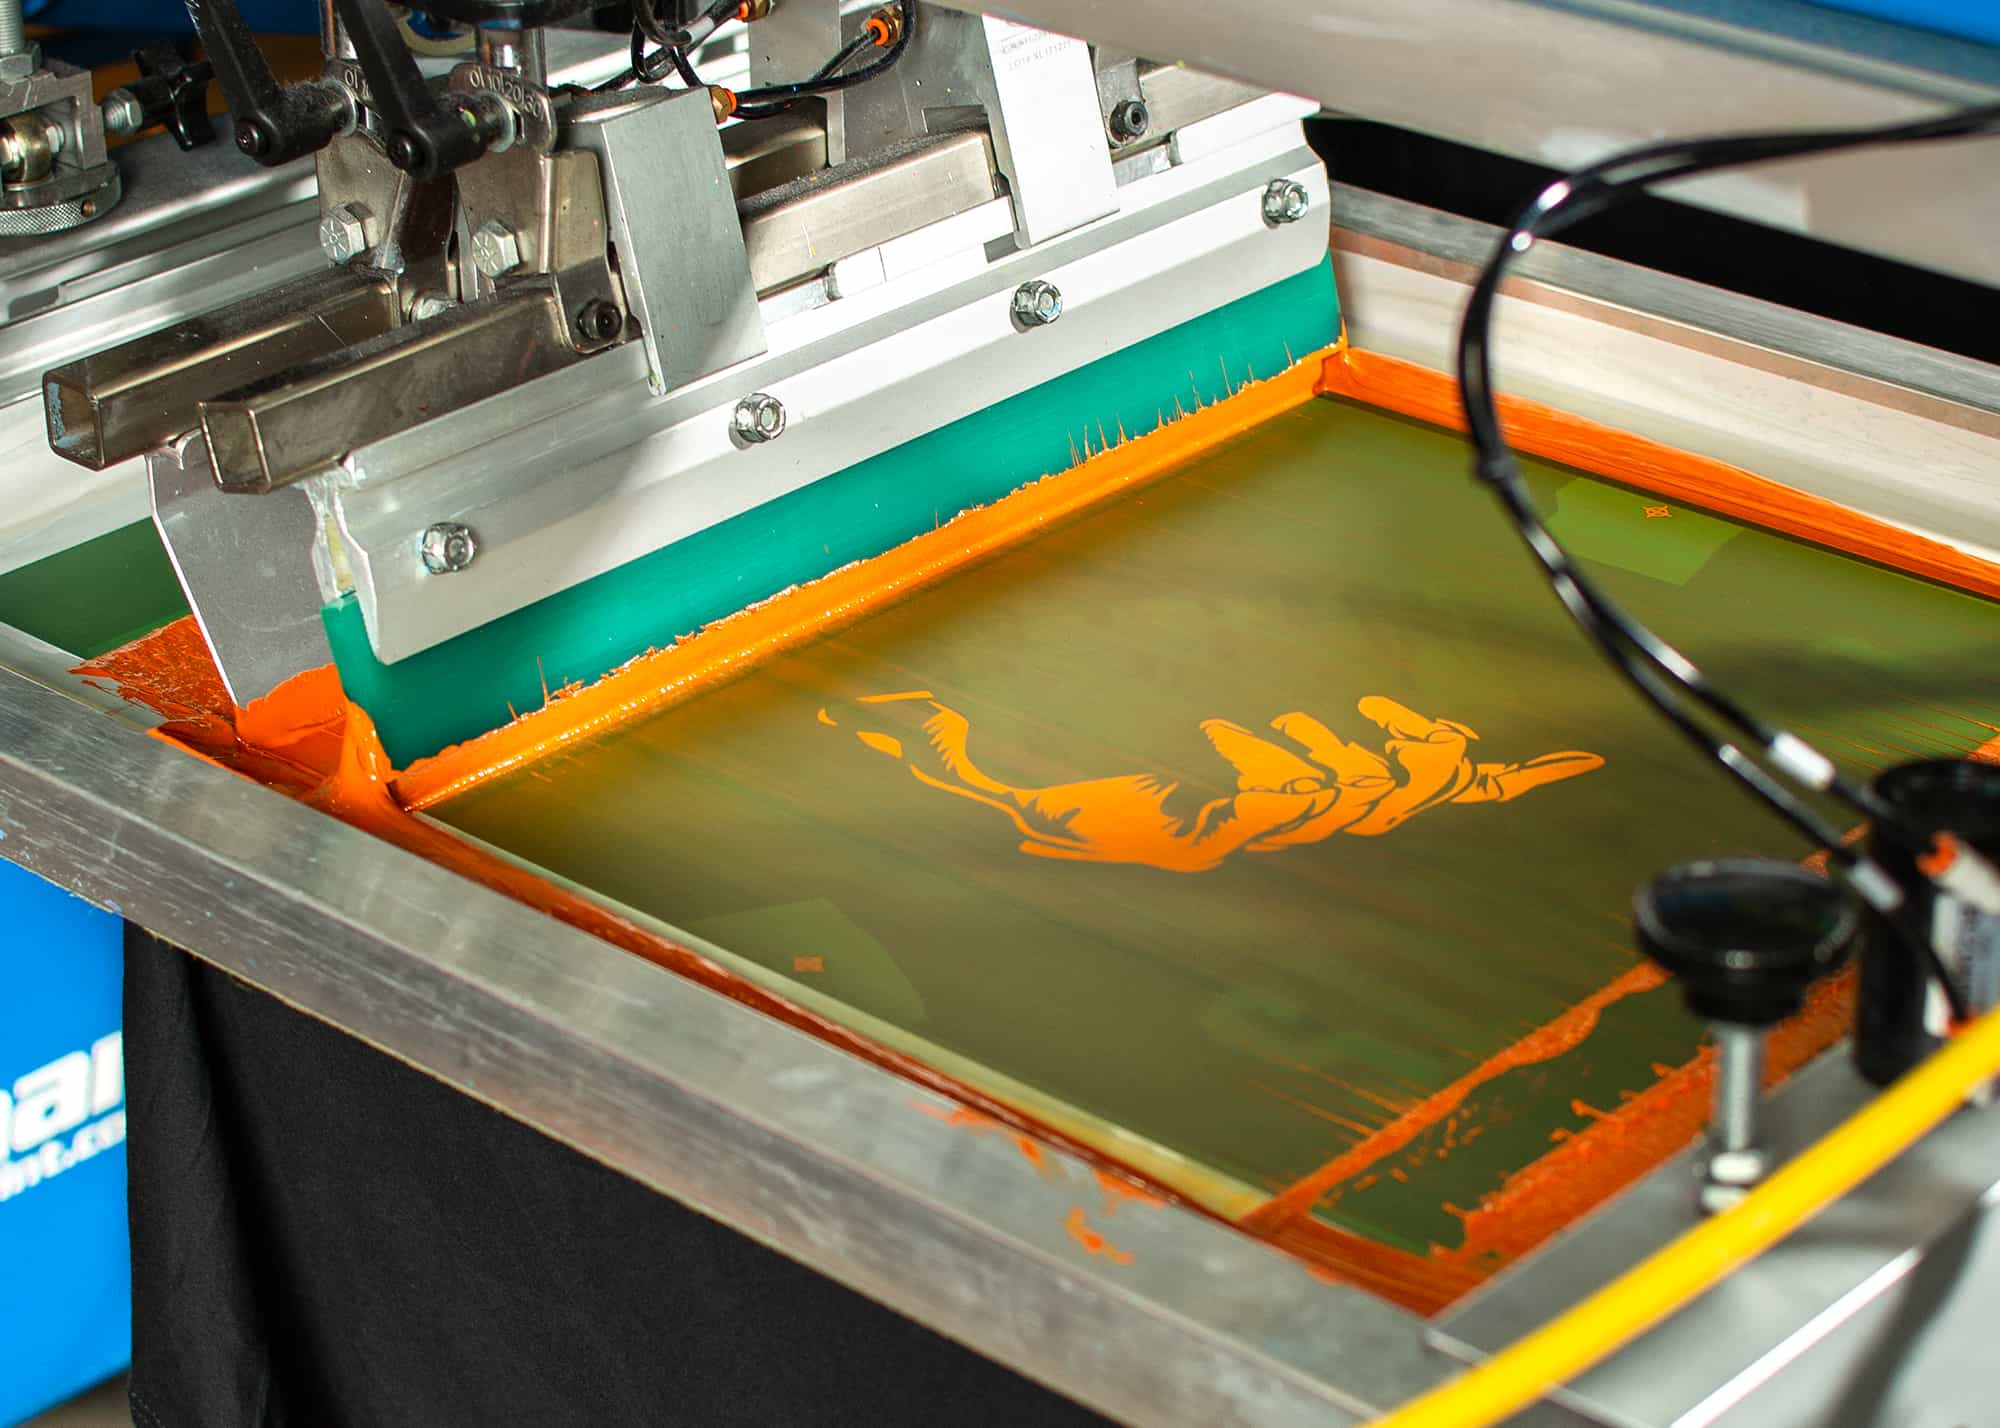 Printing the fourth color of the UberPrints 2019 Halloween design.